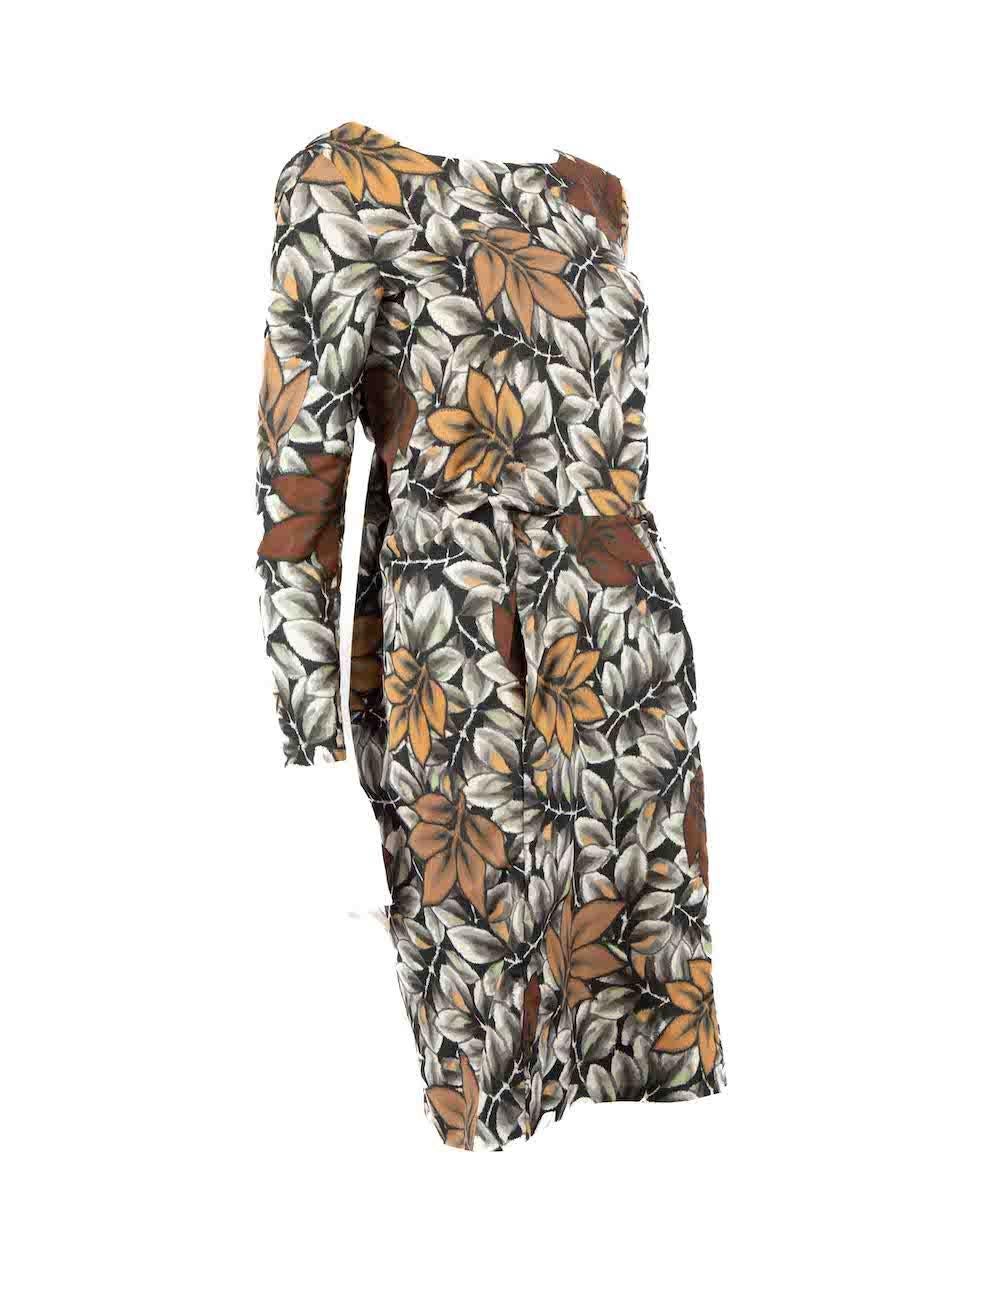 CONDITION is Very good. Minimal wear to dress is evident. Minimal loose thread to the ruched seam on front of this used Marni designer resale item.
 
 
 
 Details
 
 
 Multicolour- brown tone
 
 Polyester
 
 Dress
 
 Leaf print
 
 Knee length
 
